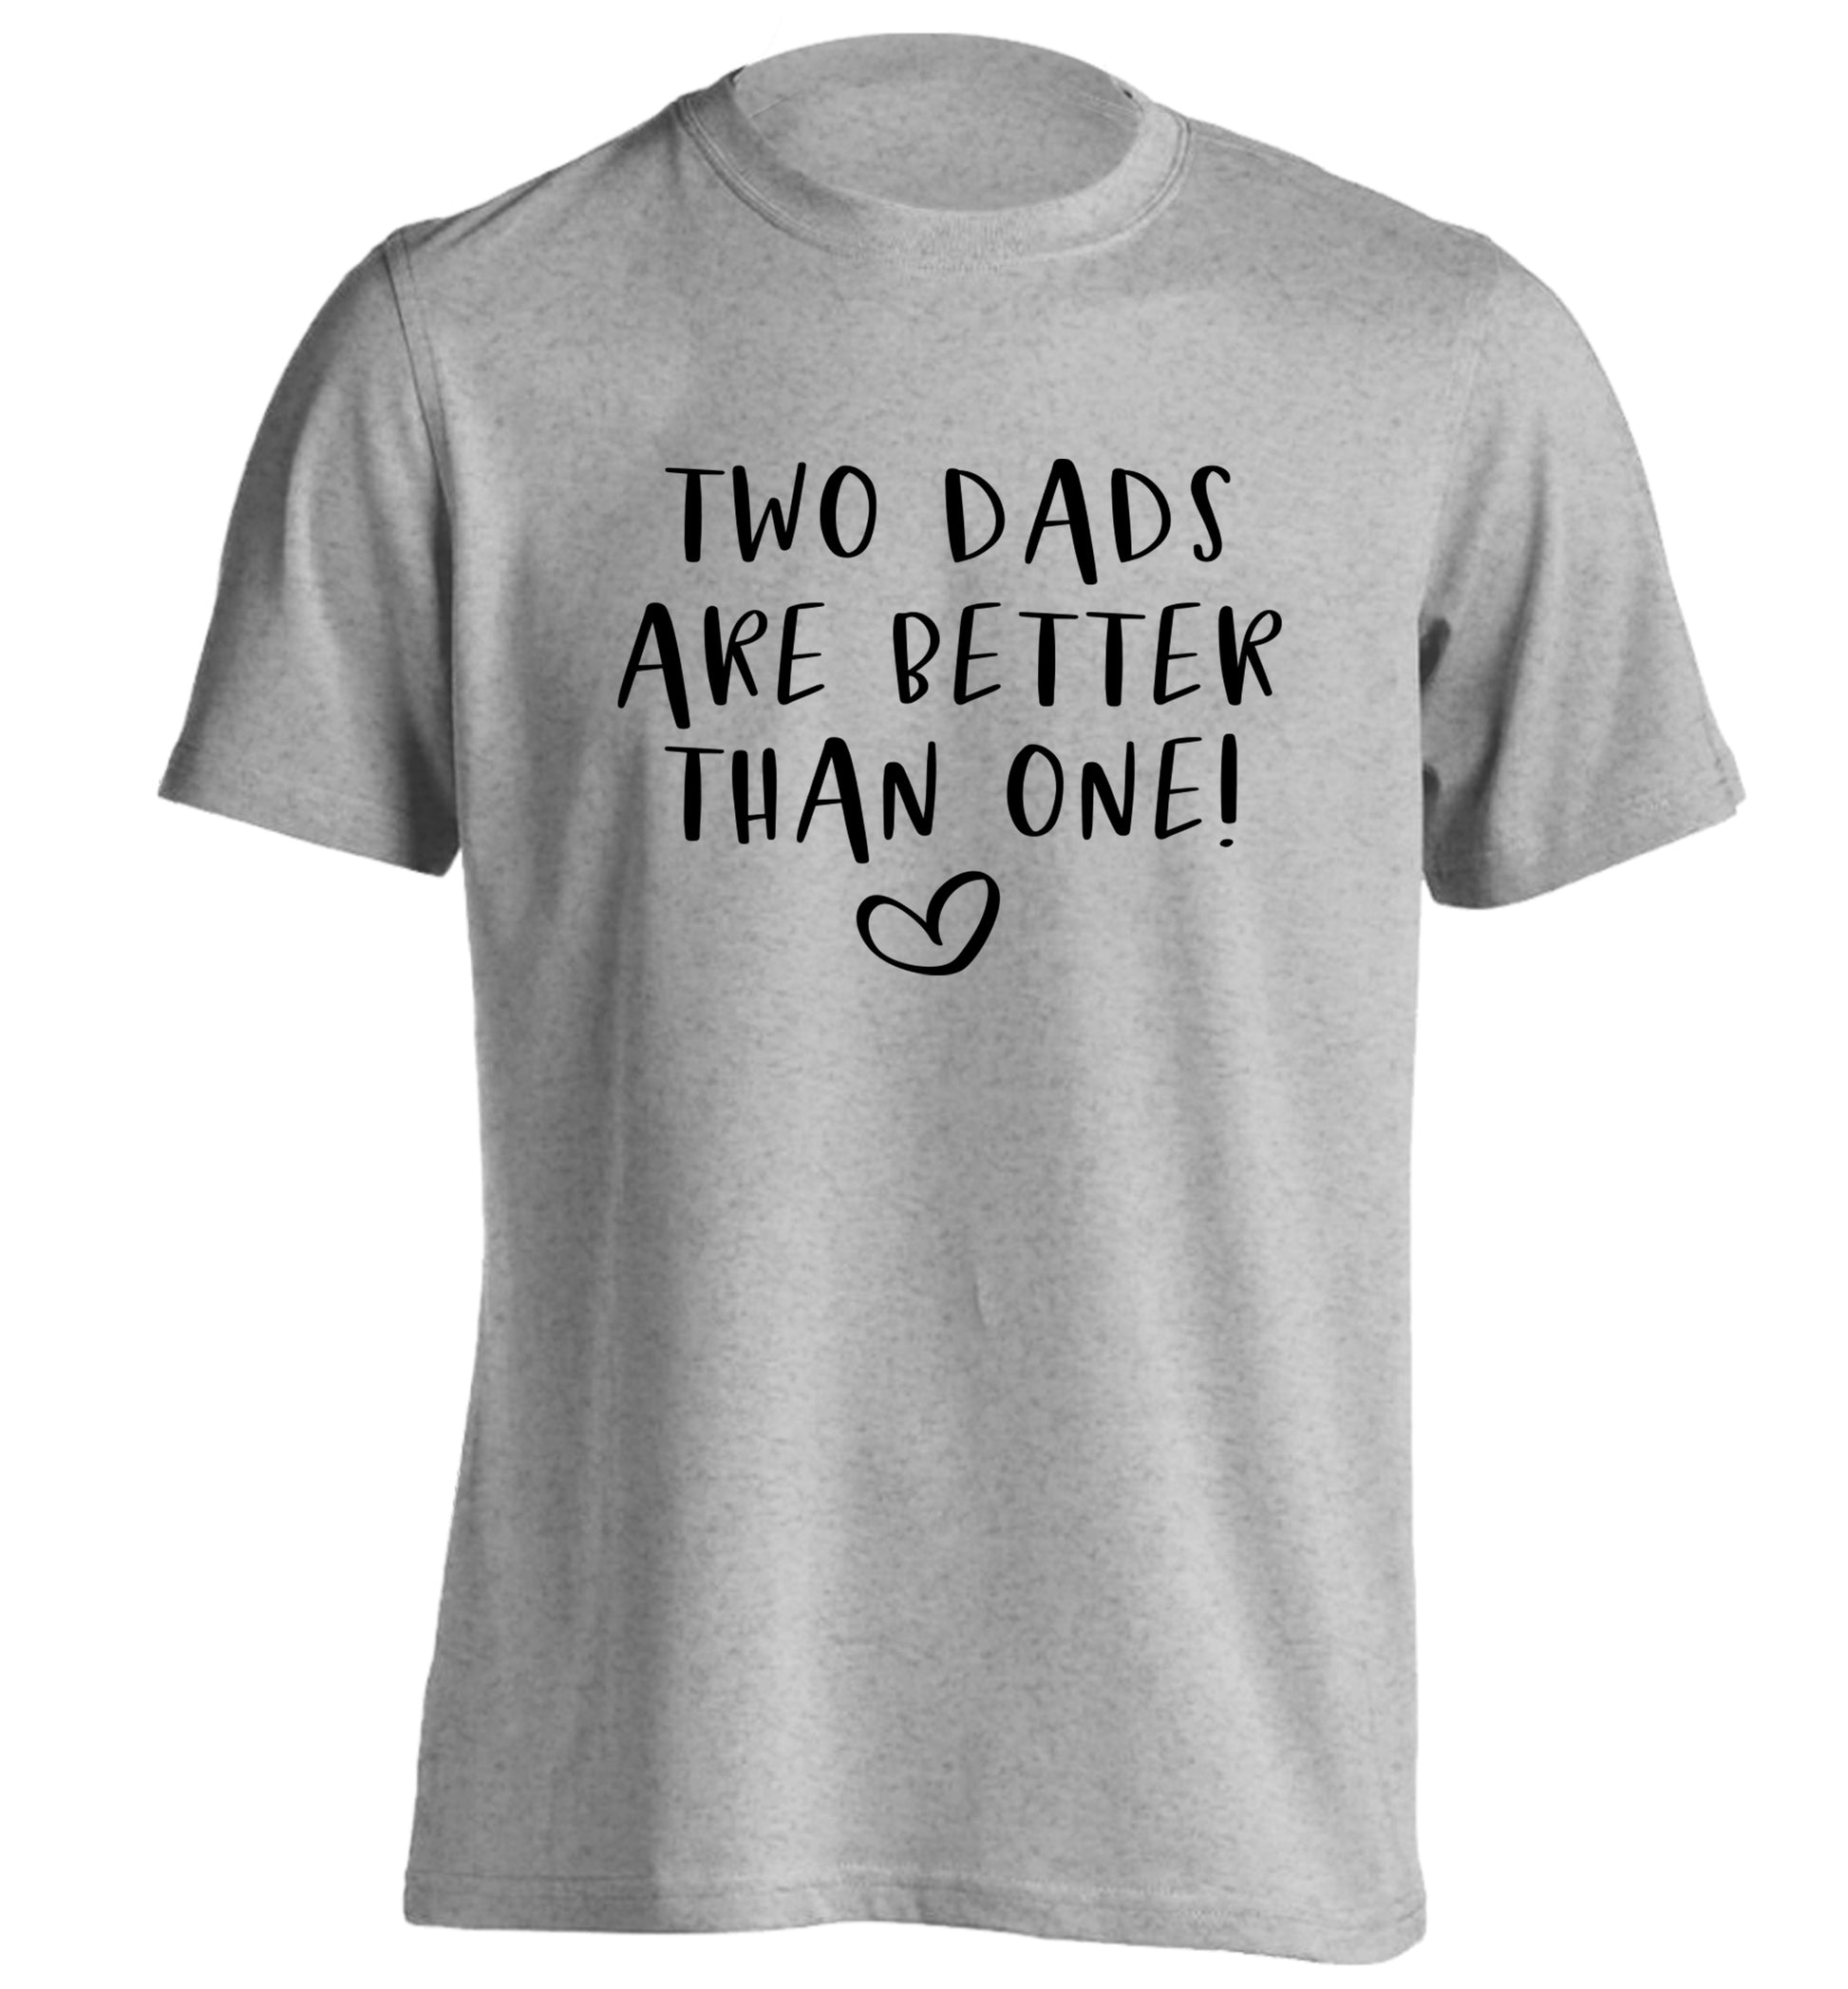 Two dads are better than one adults unisex grey Tshirt 2XL